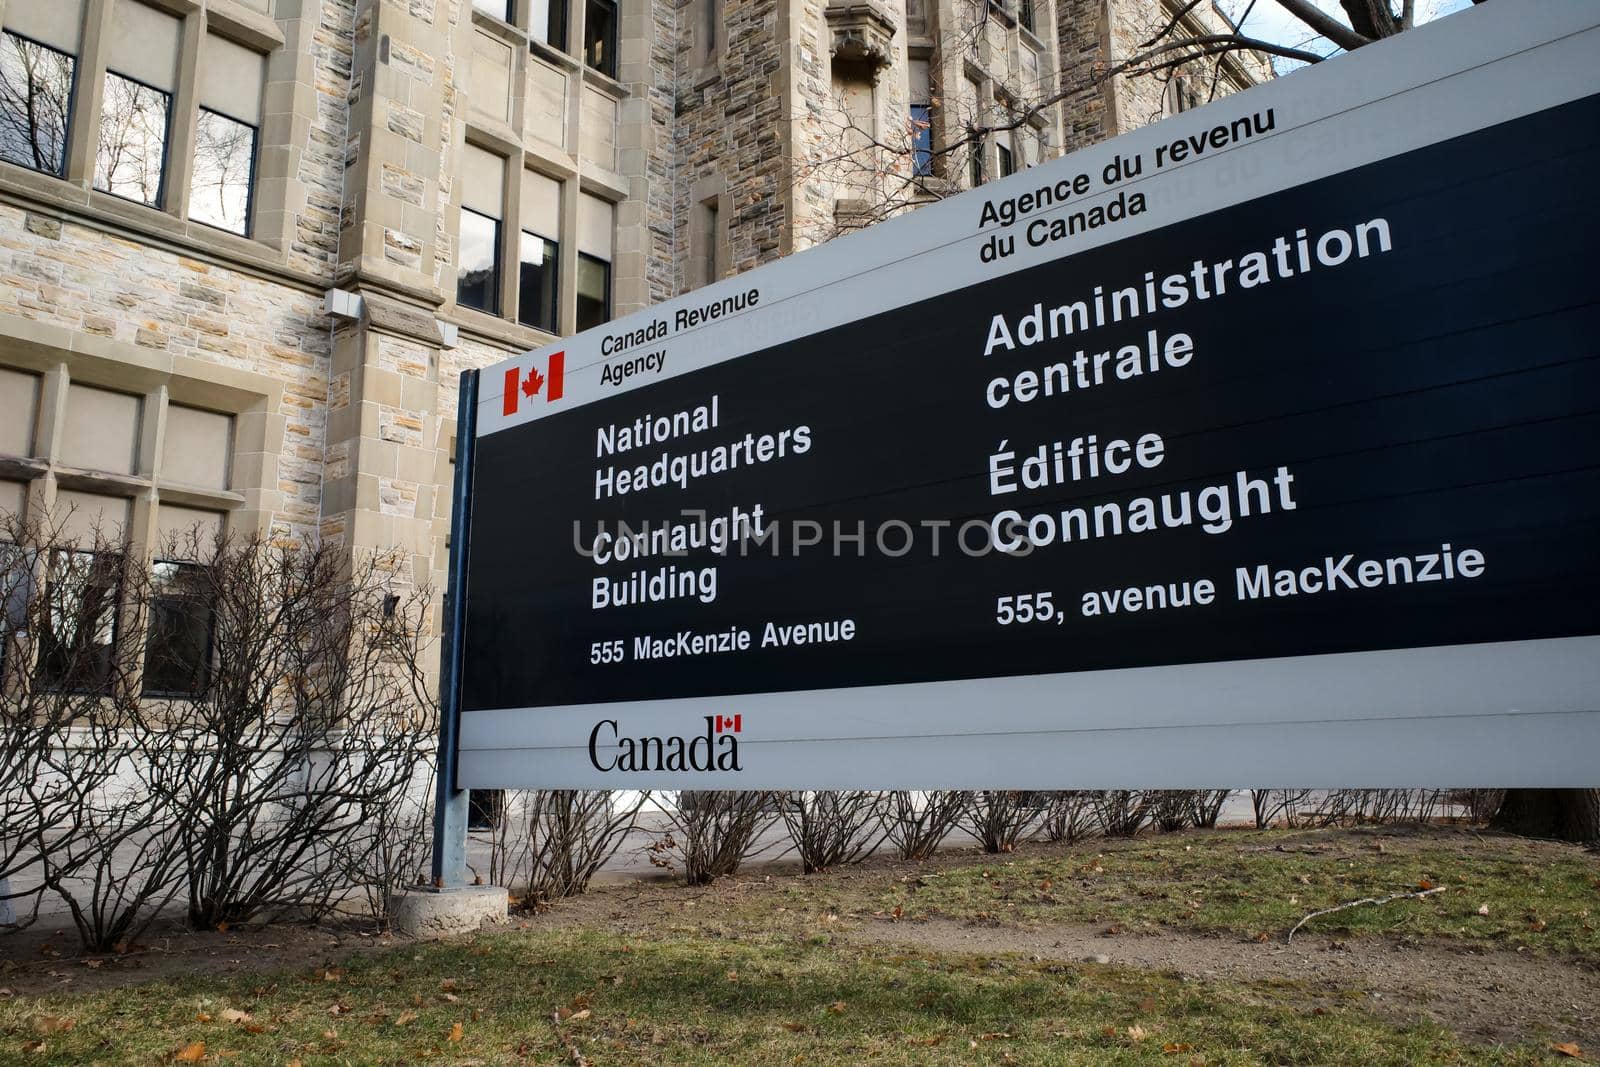 Ottawa, Ontario, Canada - November 18, 2020: A sign for the National Headquarters of the Canada Revenue Agency (CRA) outside the Connaught Building in Ottawa.